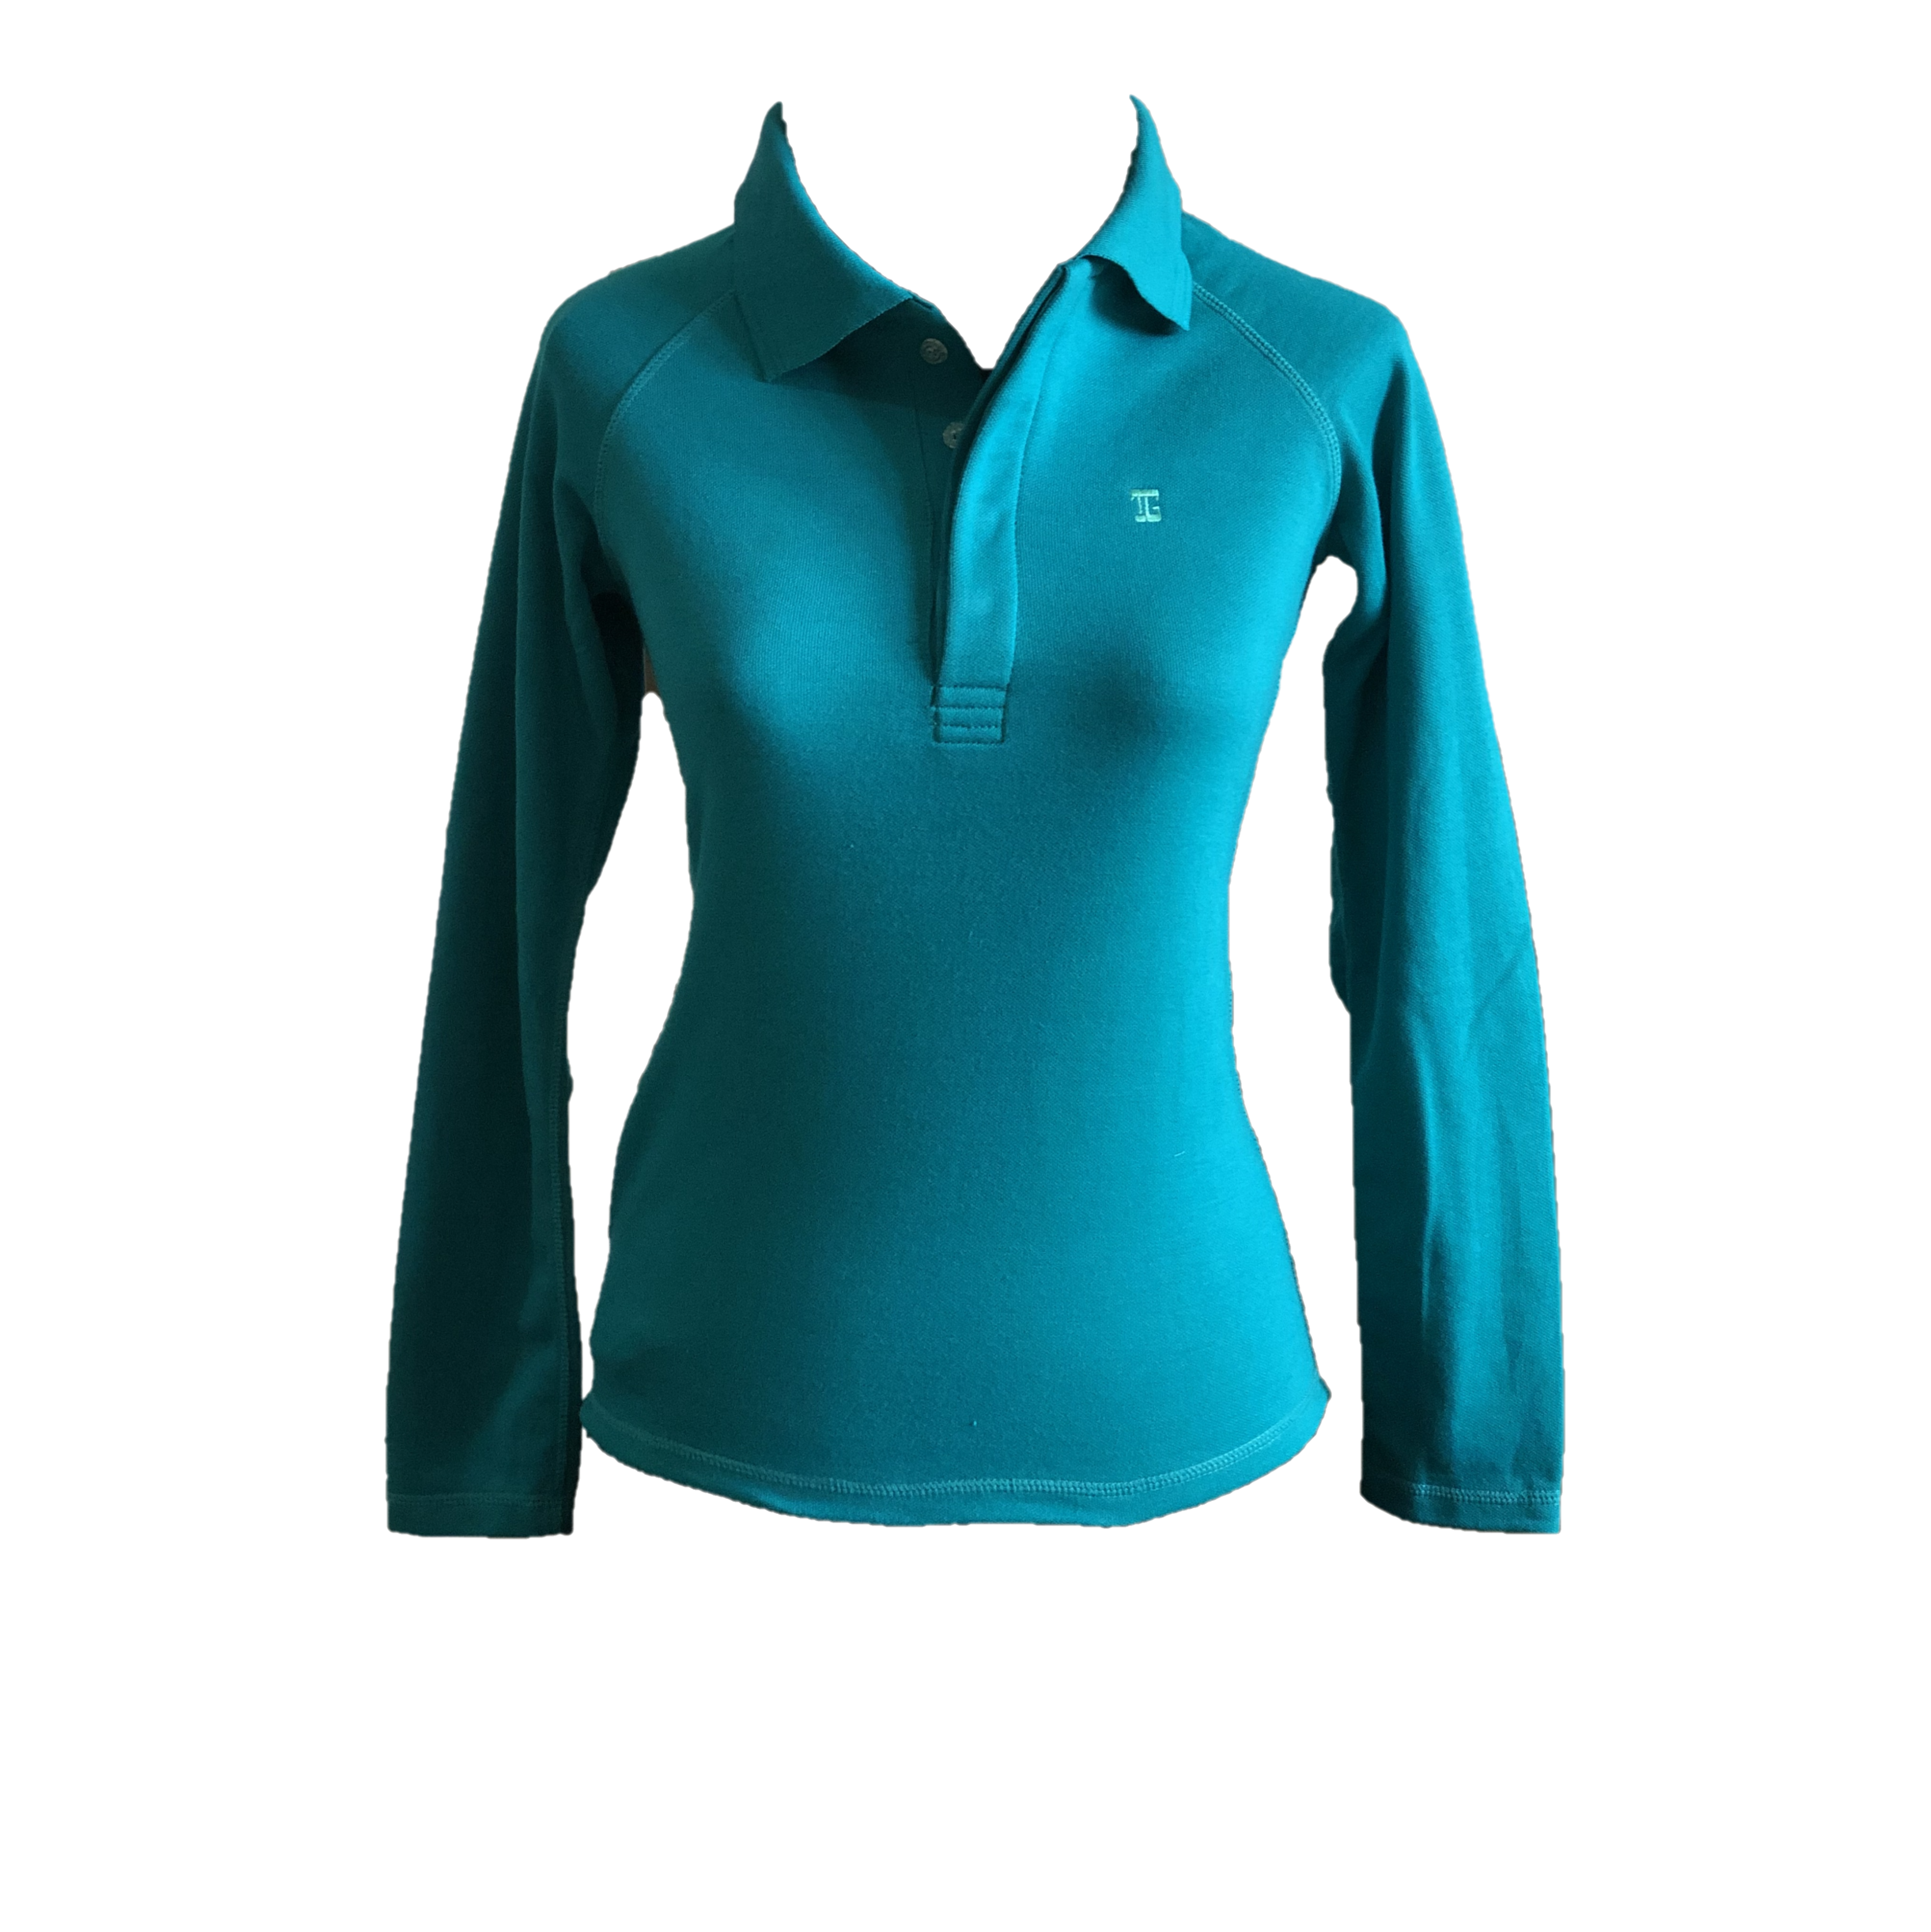 LT – 104 || Ladies Top Long Raglan Sleeve With Green One Conseald Side Same Pocket and Conseald Button Collar.